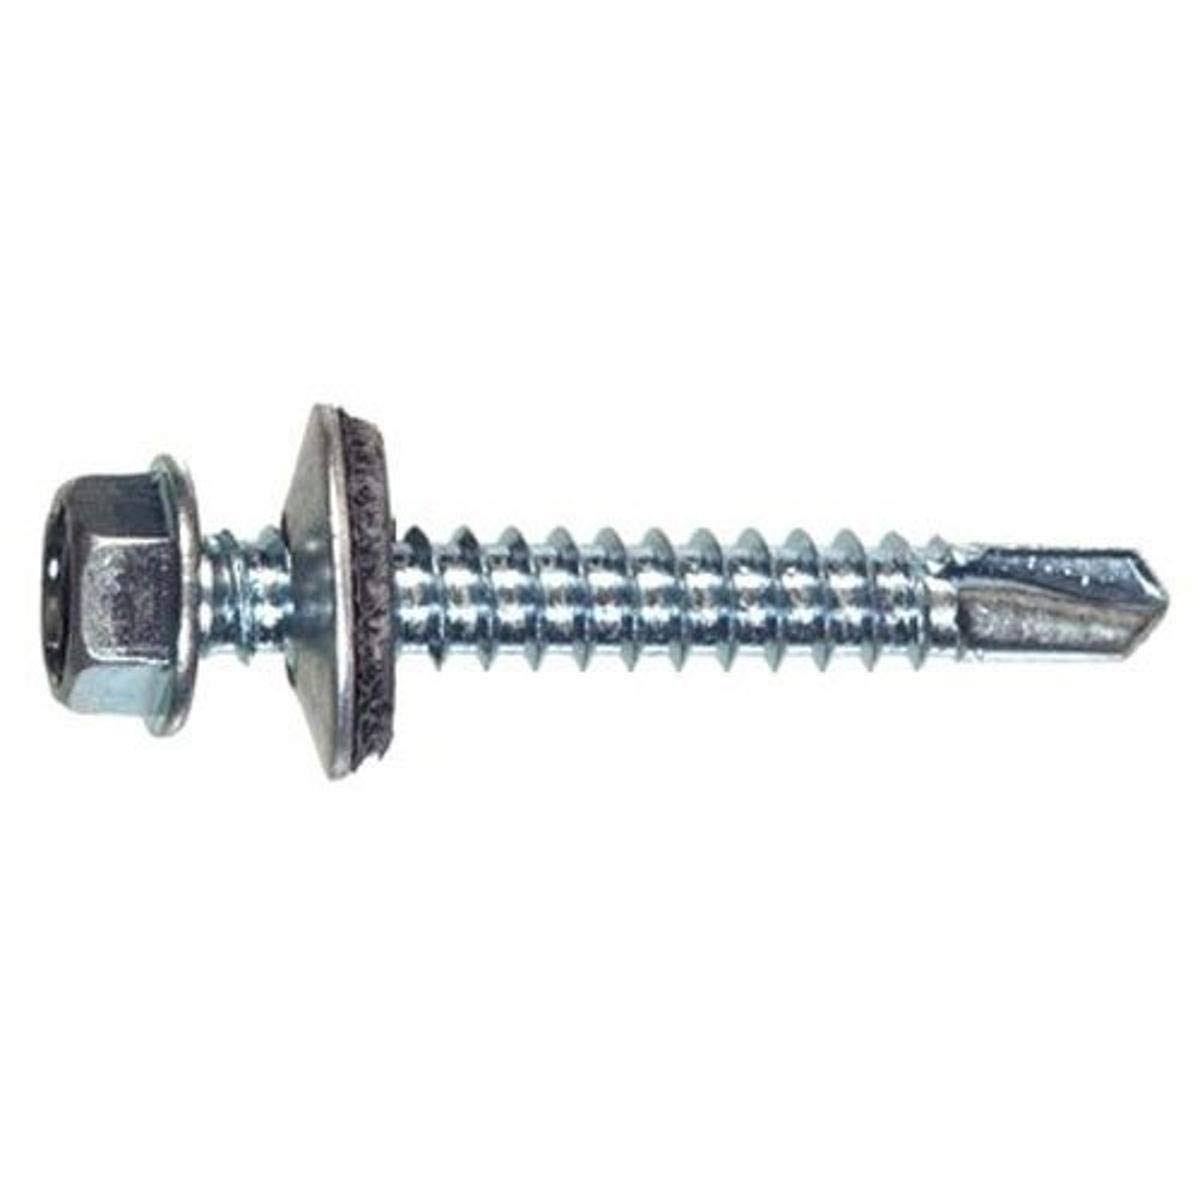 The Hillman Group 47265 1/4-14 X 1-inch Hex Washer Head Self Drilling Screw